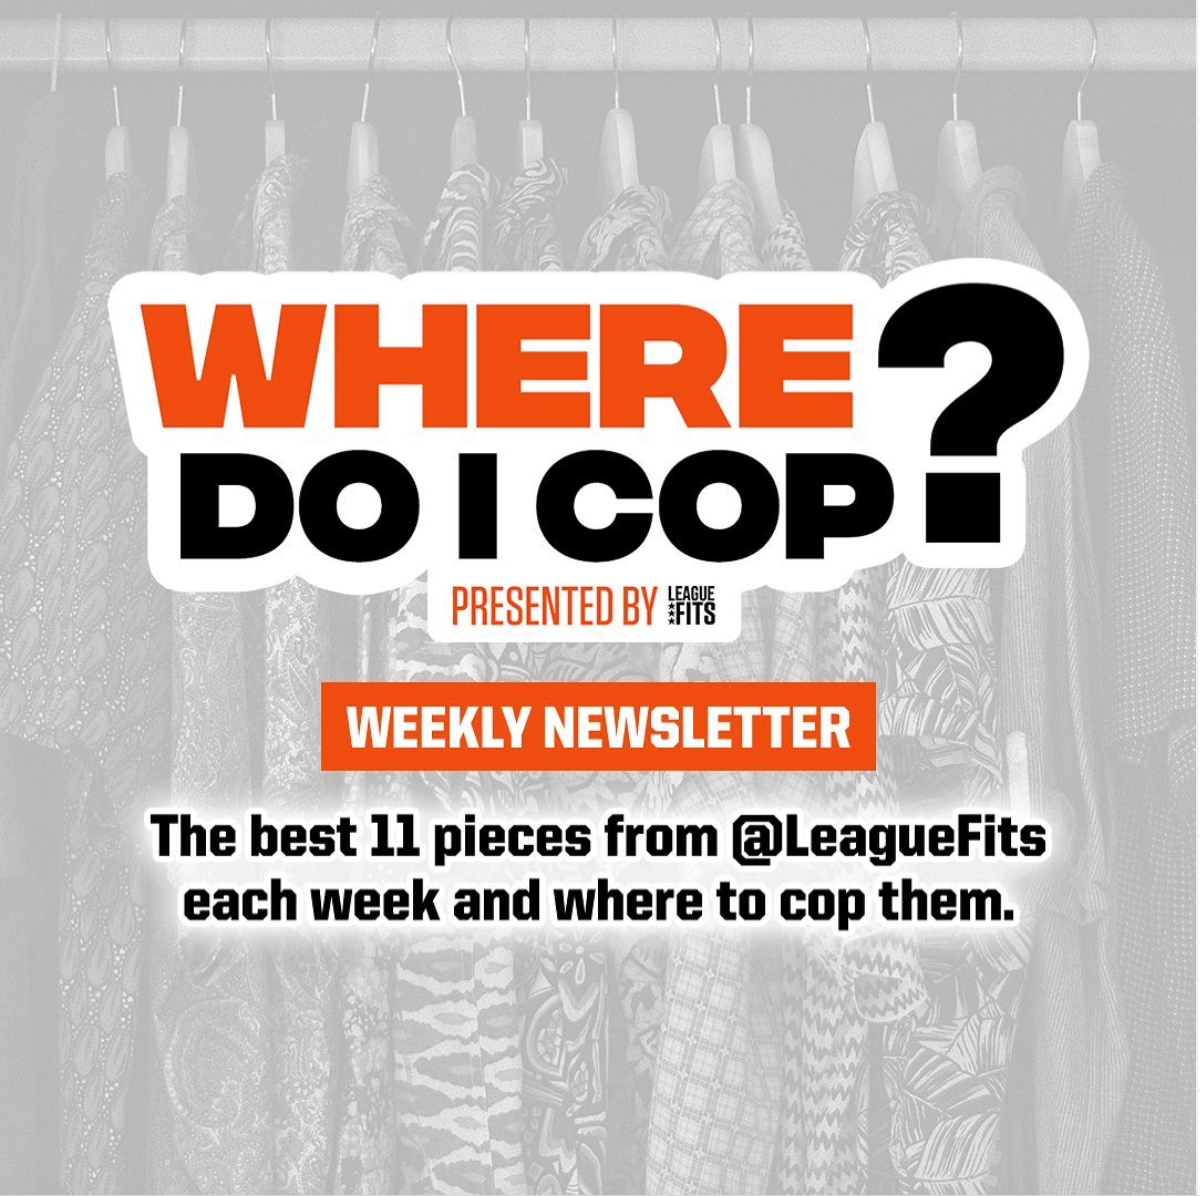 LeagueFits’ Exclusive Newsletter, ‘Where Do I Cop?’ Spotlights Fashion Around the League